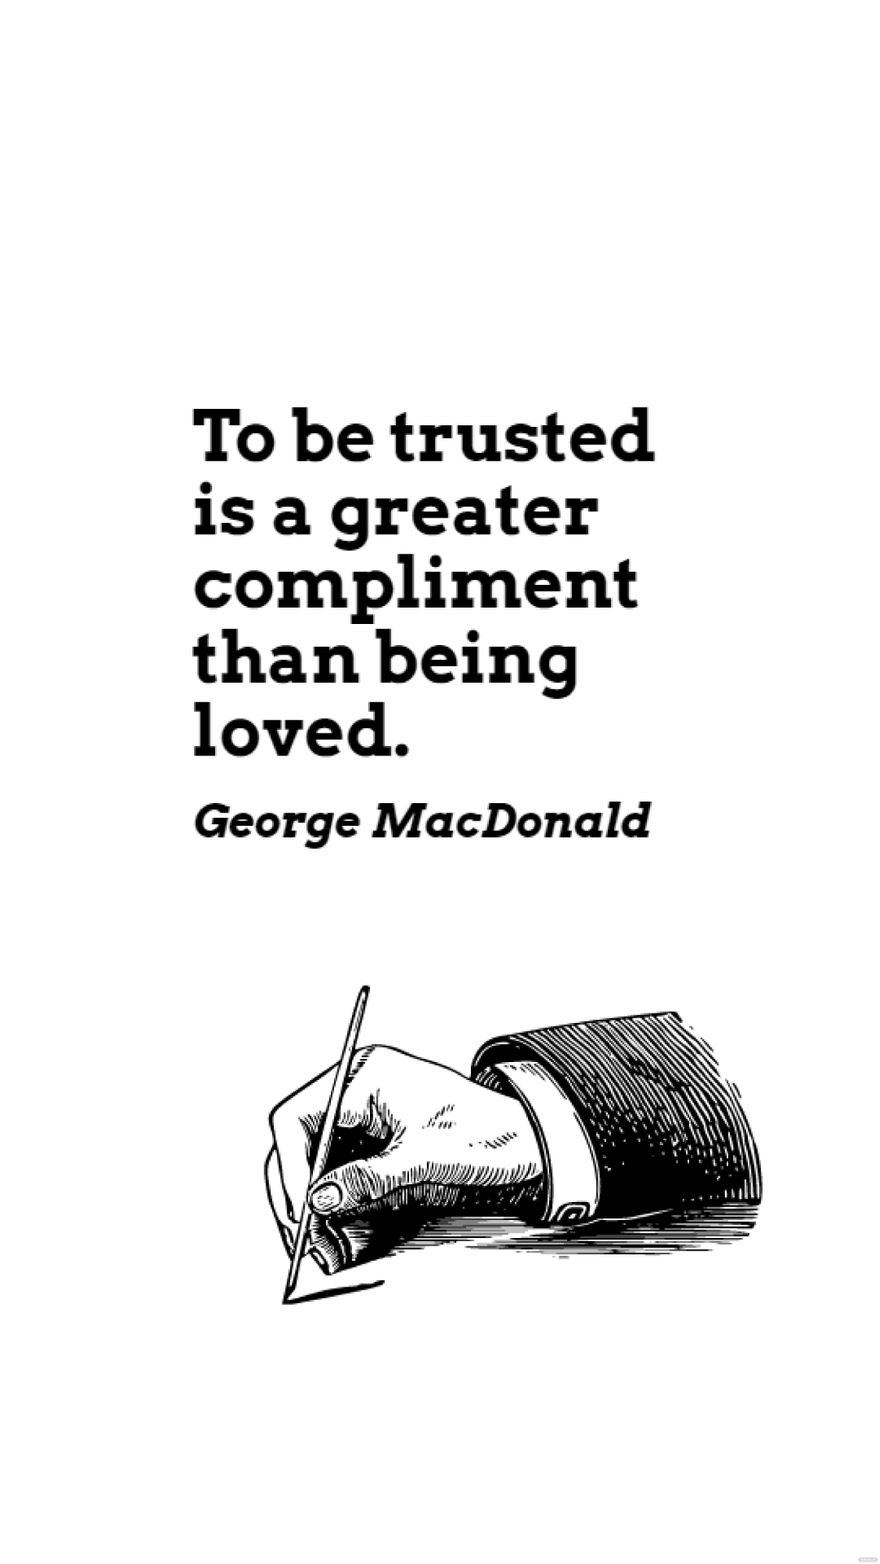 Free George MacDonald - To be trusted is a greater compliment than being loved. in JPG